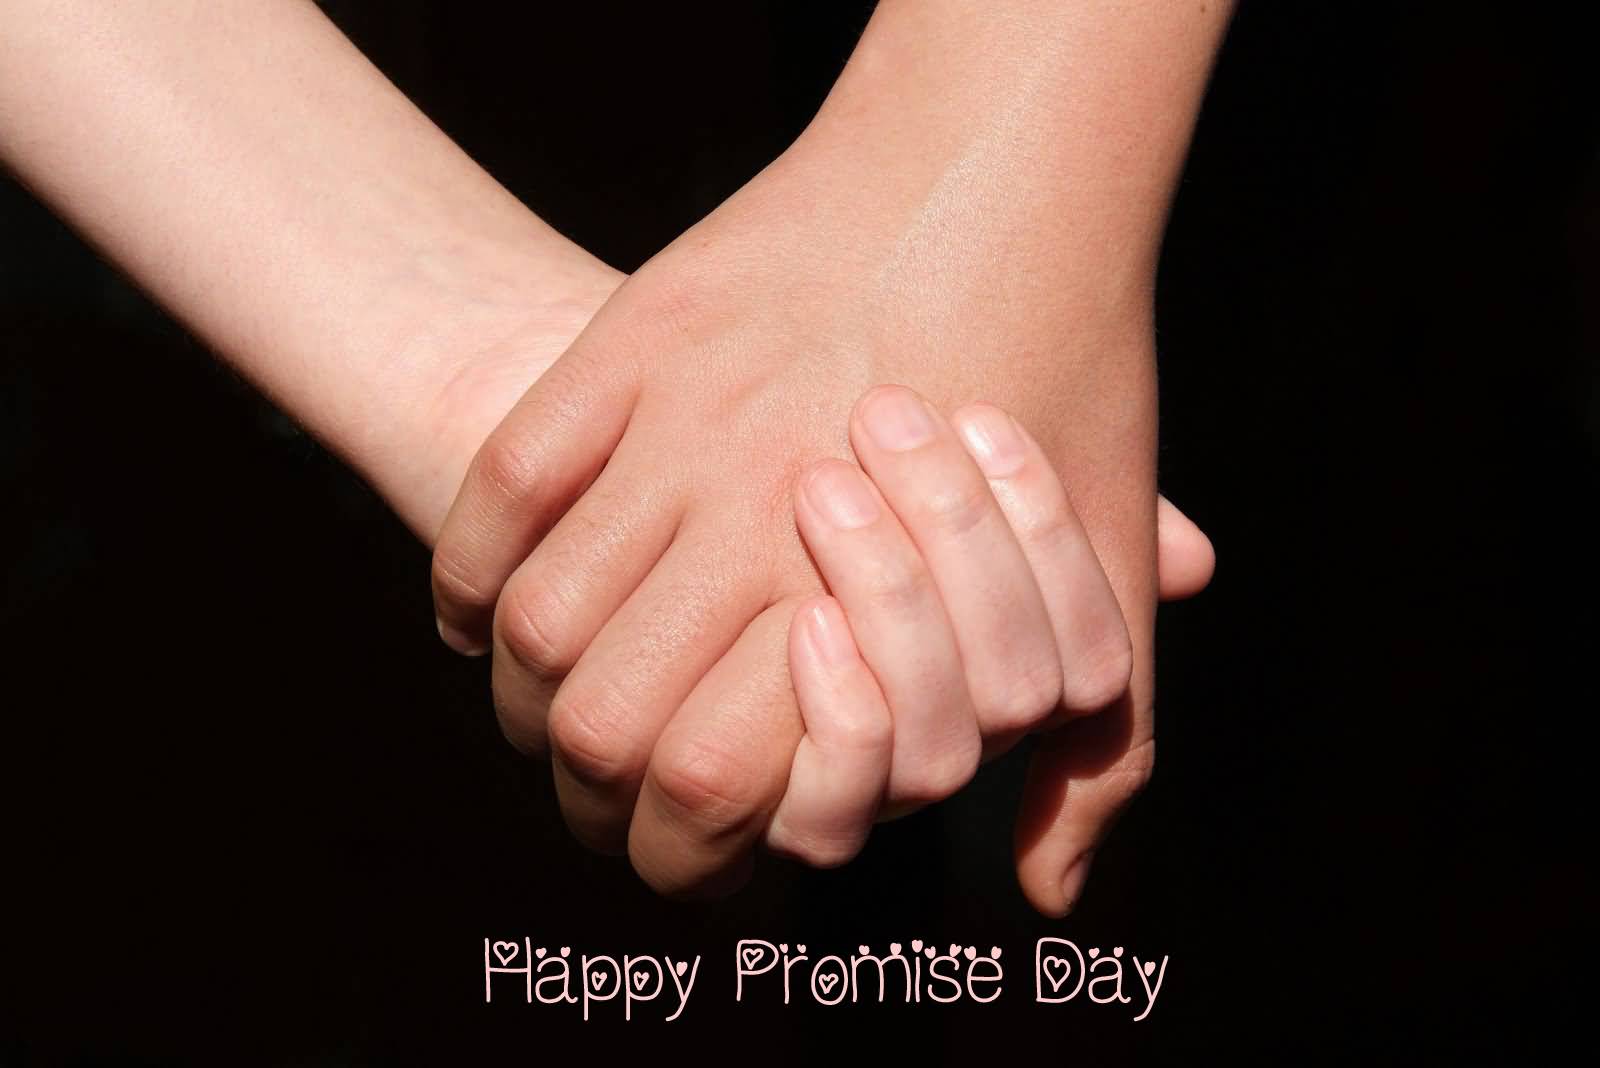 50 Best Happy Promise Day 2017 Greeting Pictures